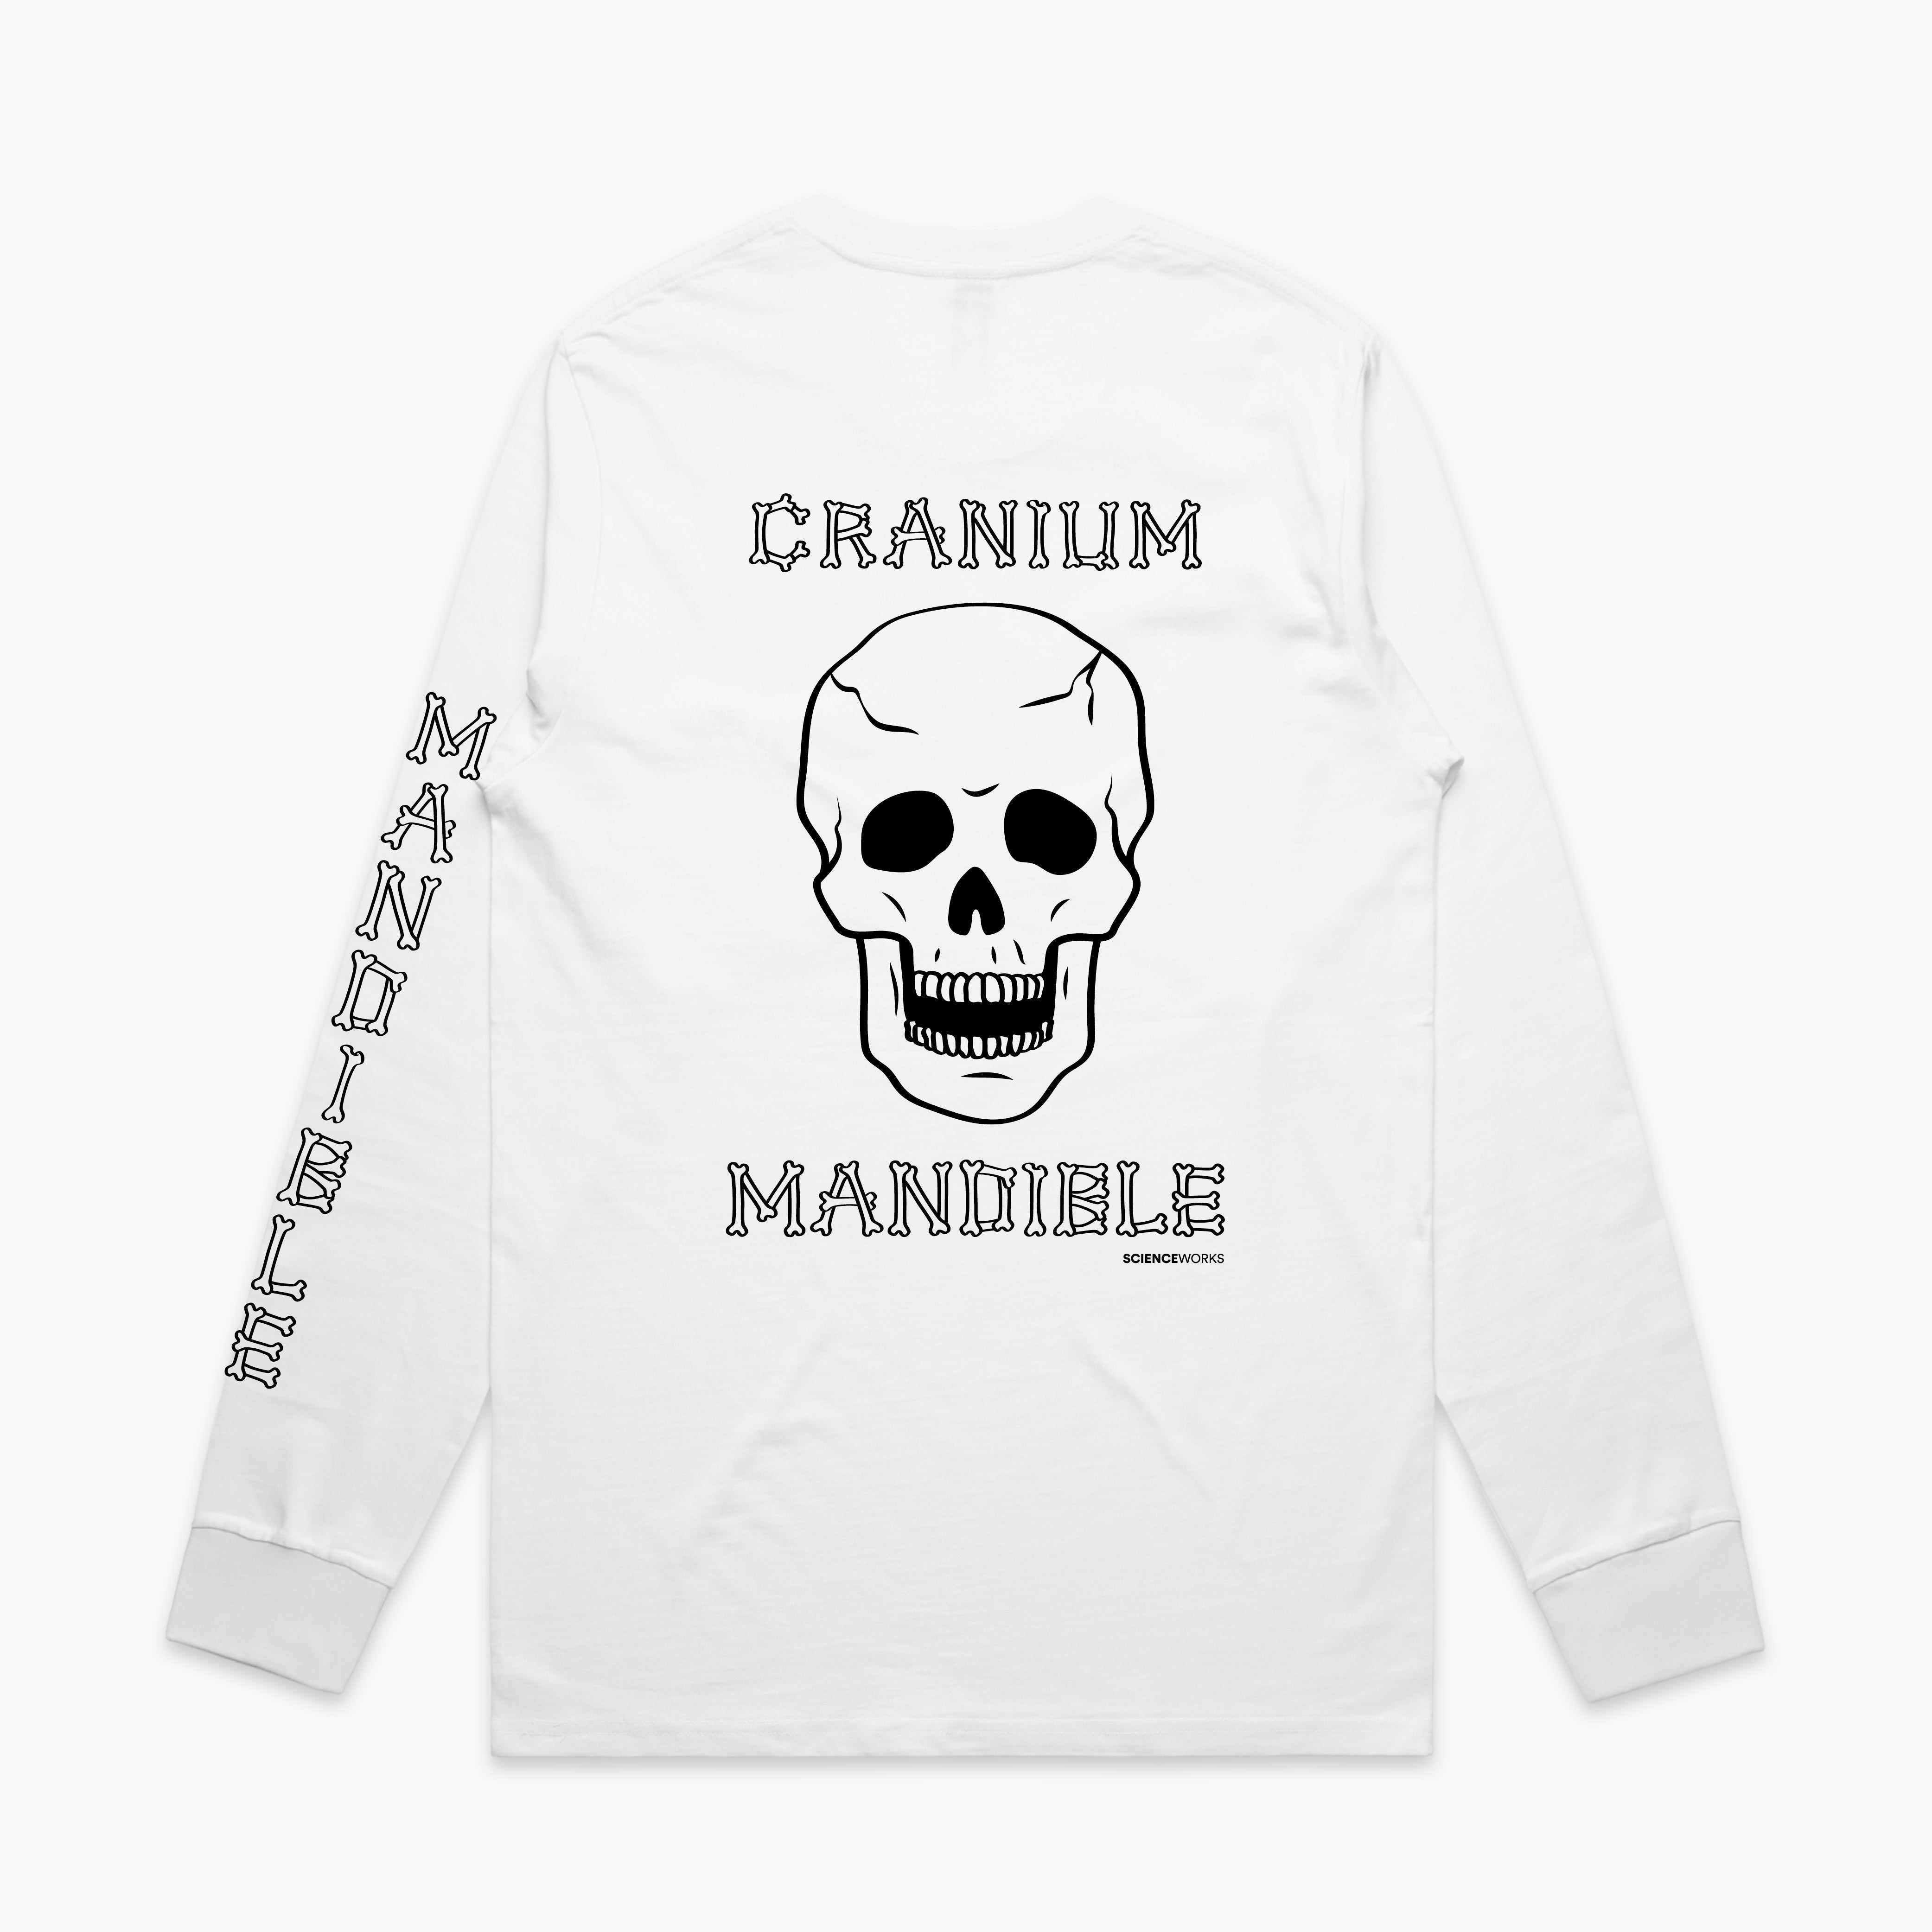 The back view of a white adult's long sleeve tee. MANDIBLE is written in a font made of bones down the back of the left arm. CRANIUM MANDIBLE is written in the same bone font across the centre back, with a large human skull below and above the two words respectively. Scienceworks is printed in a small font to the bottom right of the word MANDIBLE on the back.